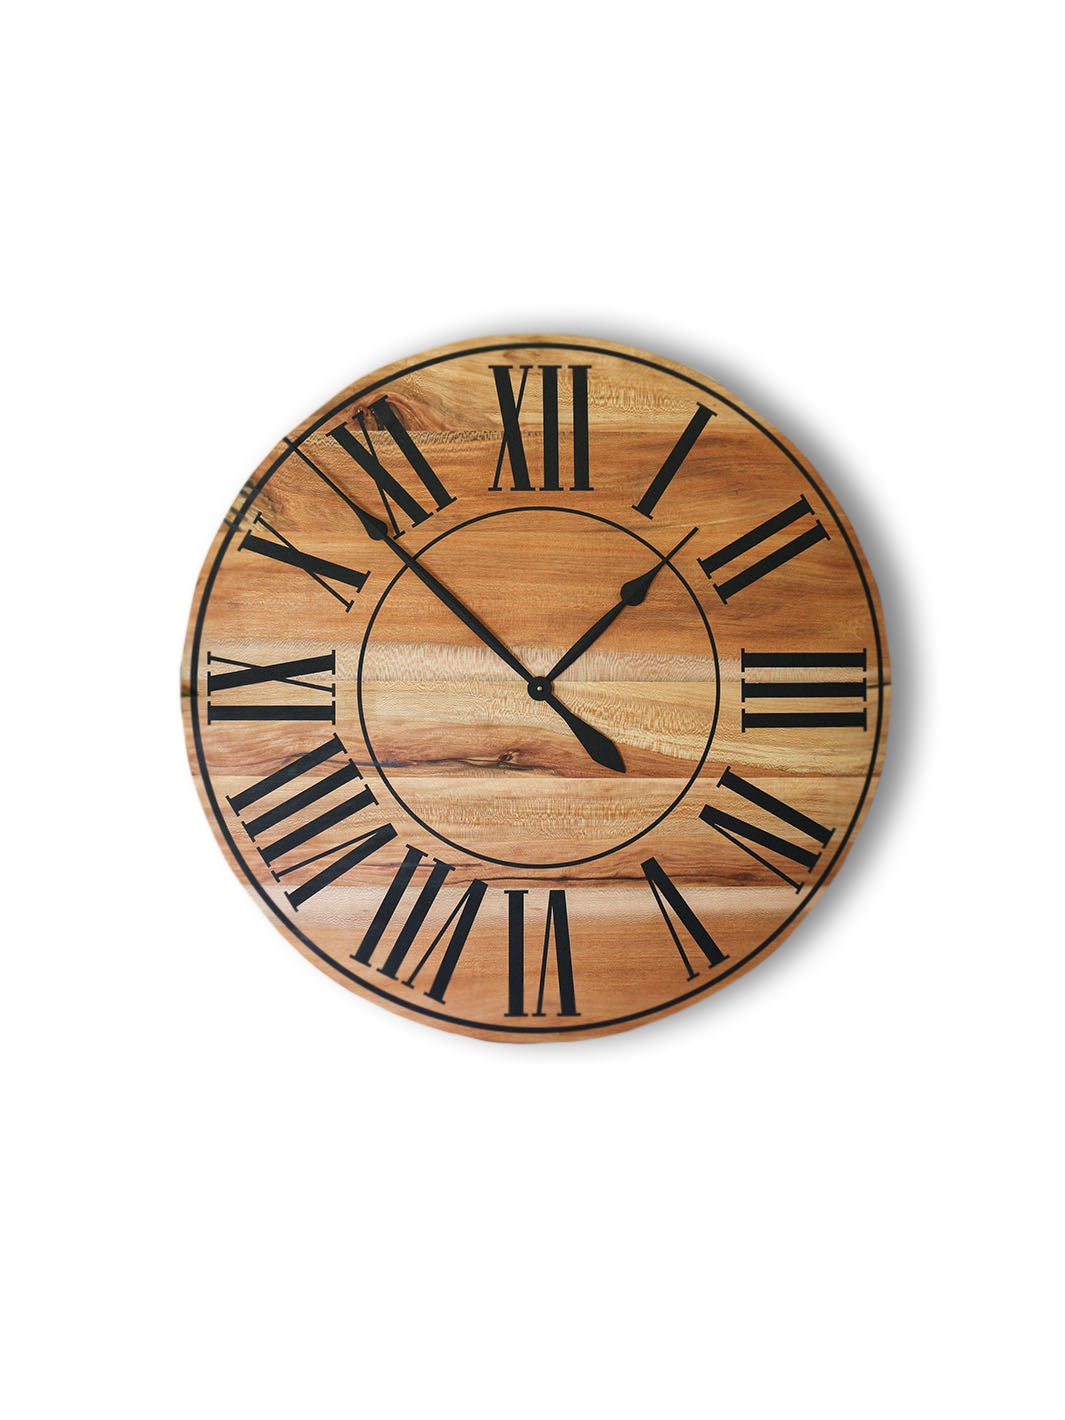 Large Quartersawn Sycamore Hardwood Wall Clock with Black Roman Numerals Earthly Comfort Clocks 610